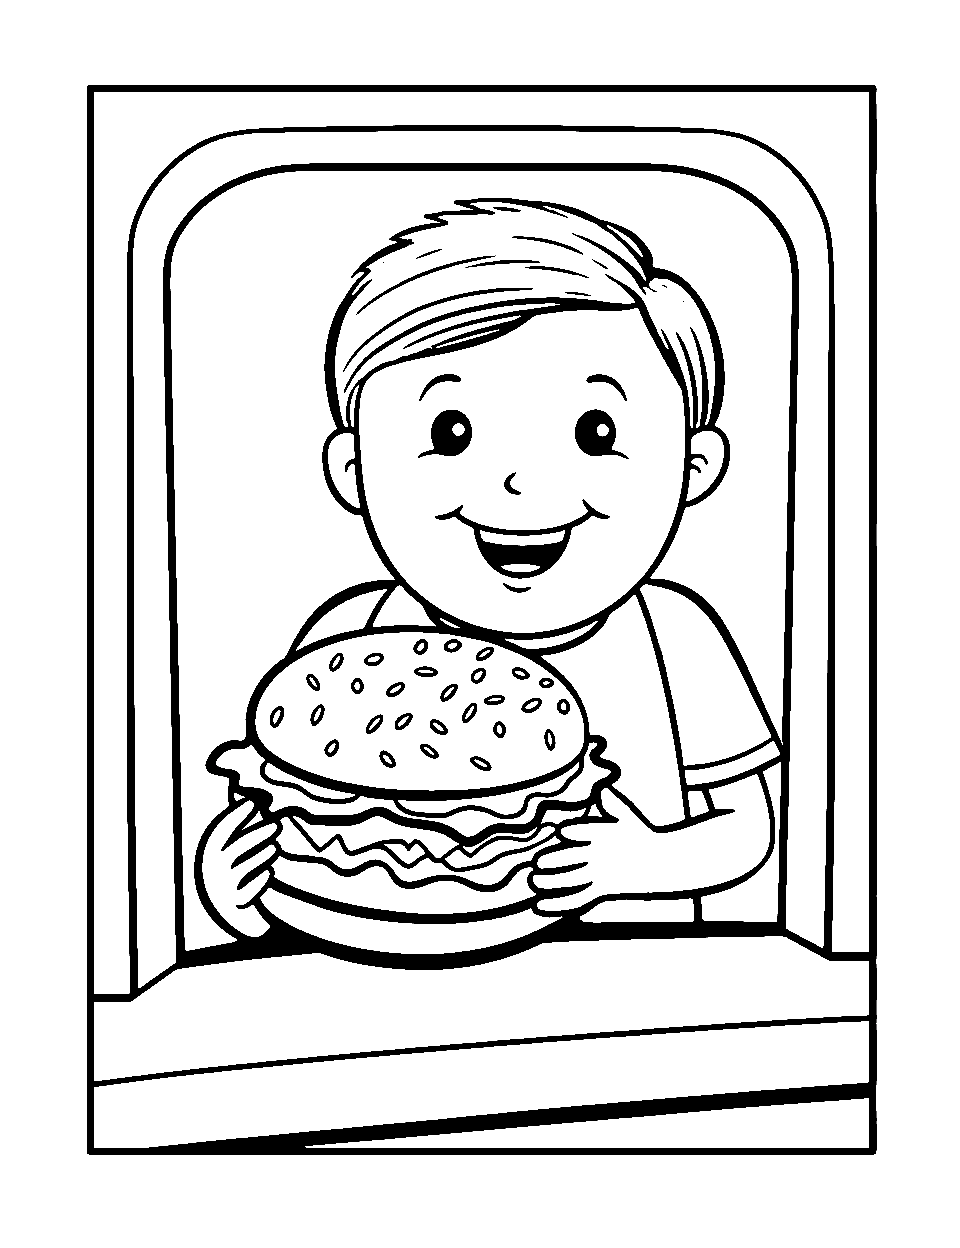 Drive-Thru Window Food Coloring Page - A man serving food from a drive-thru window.